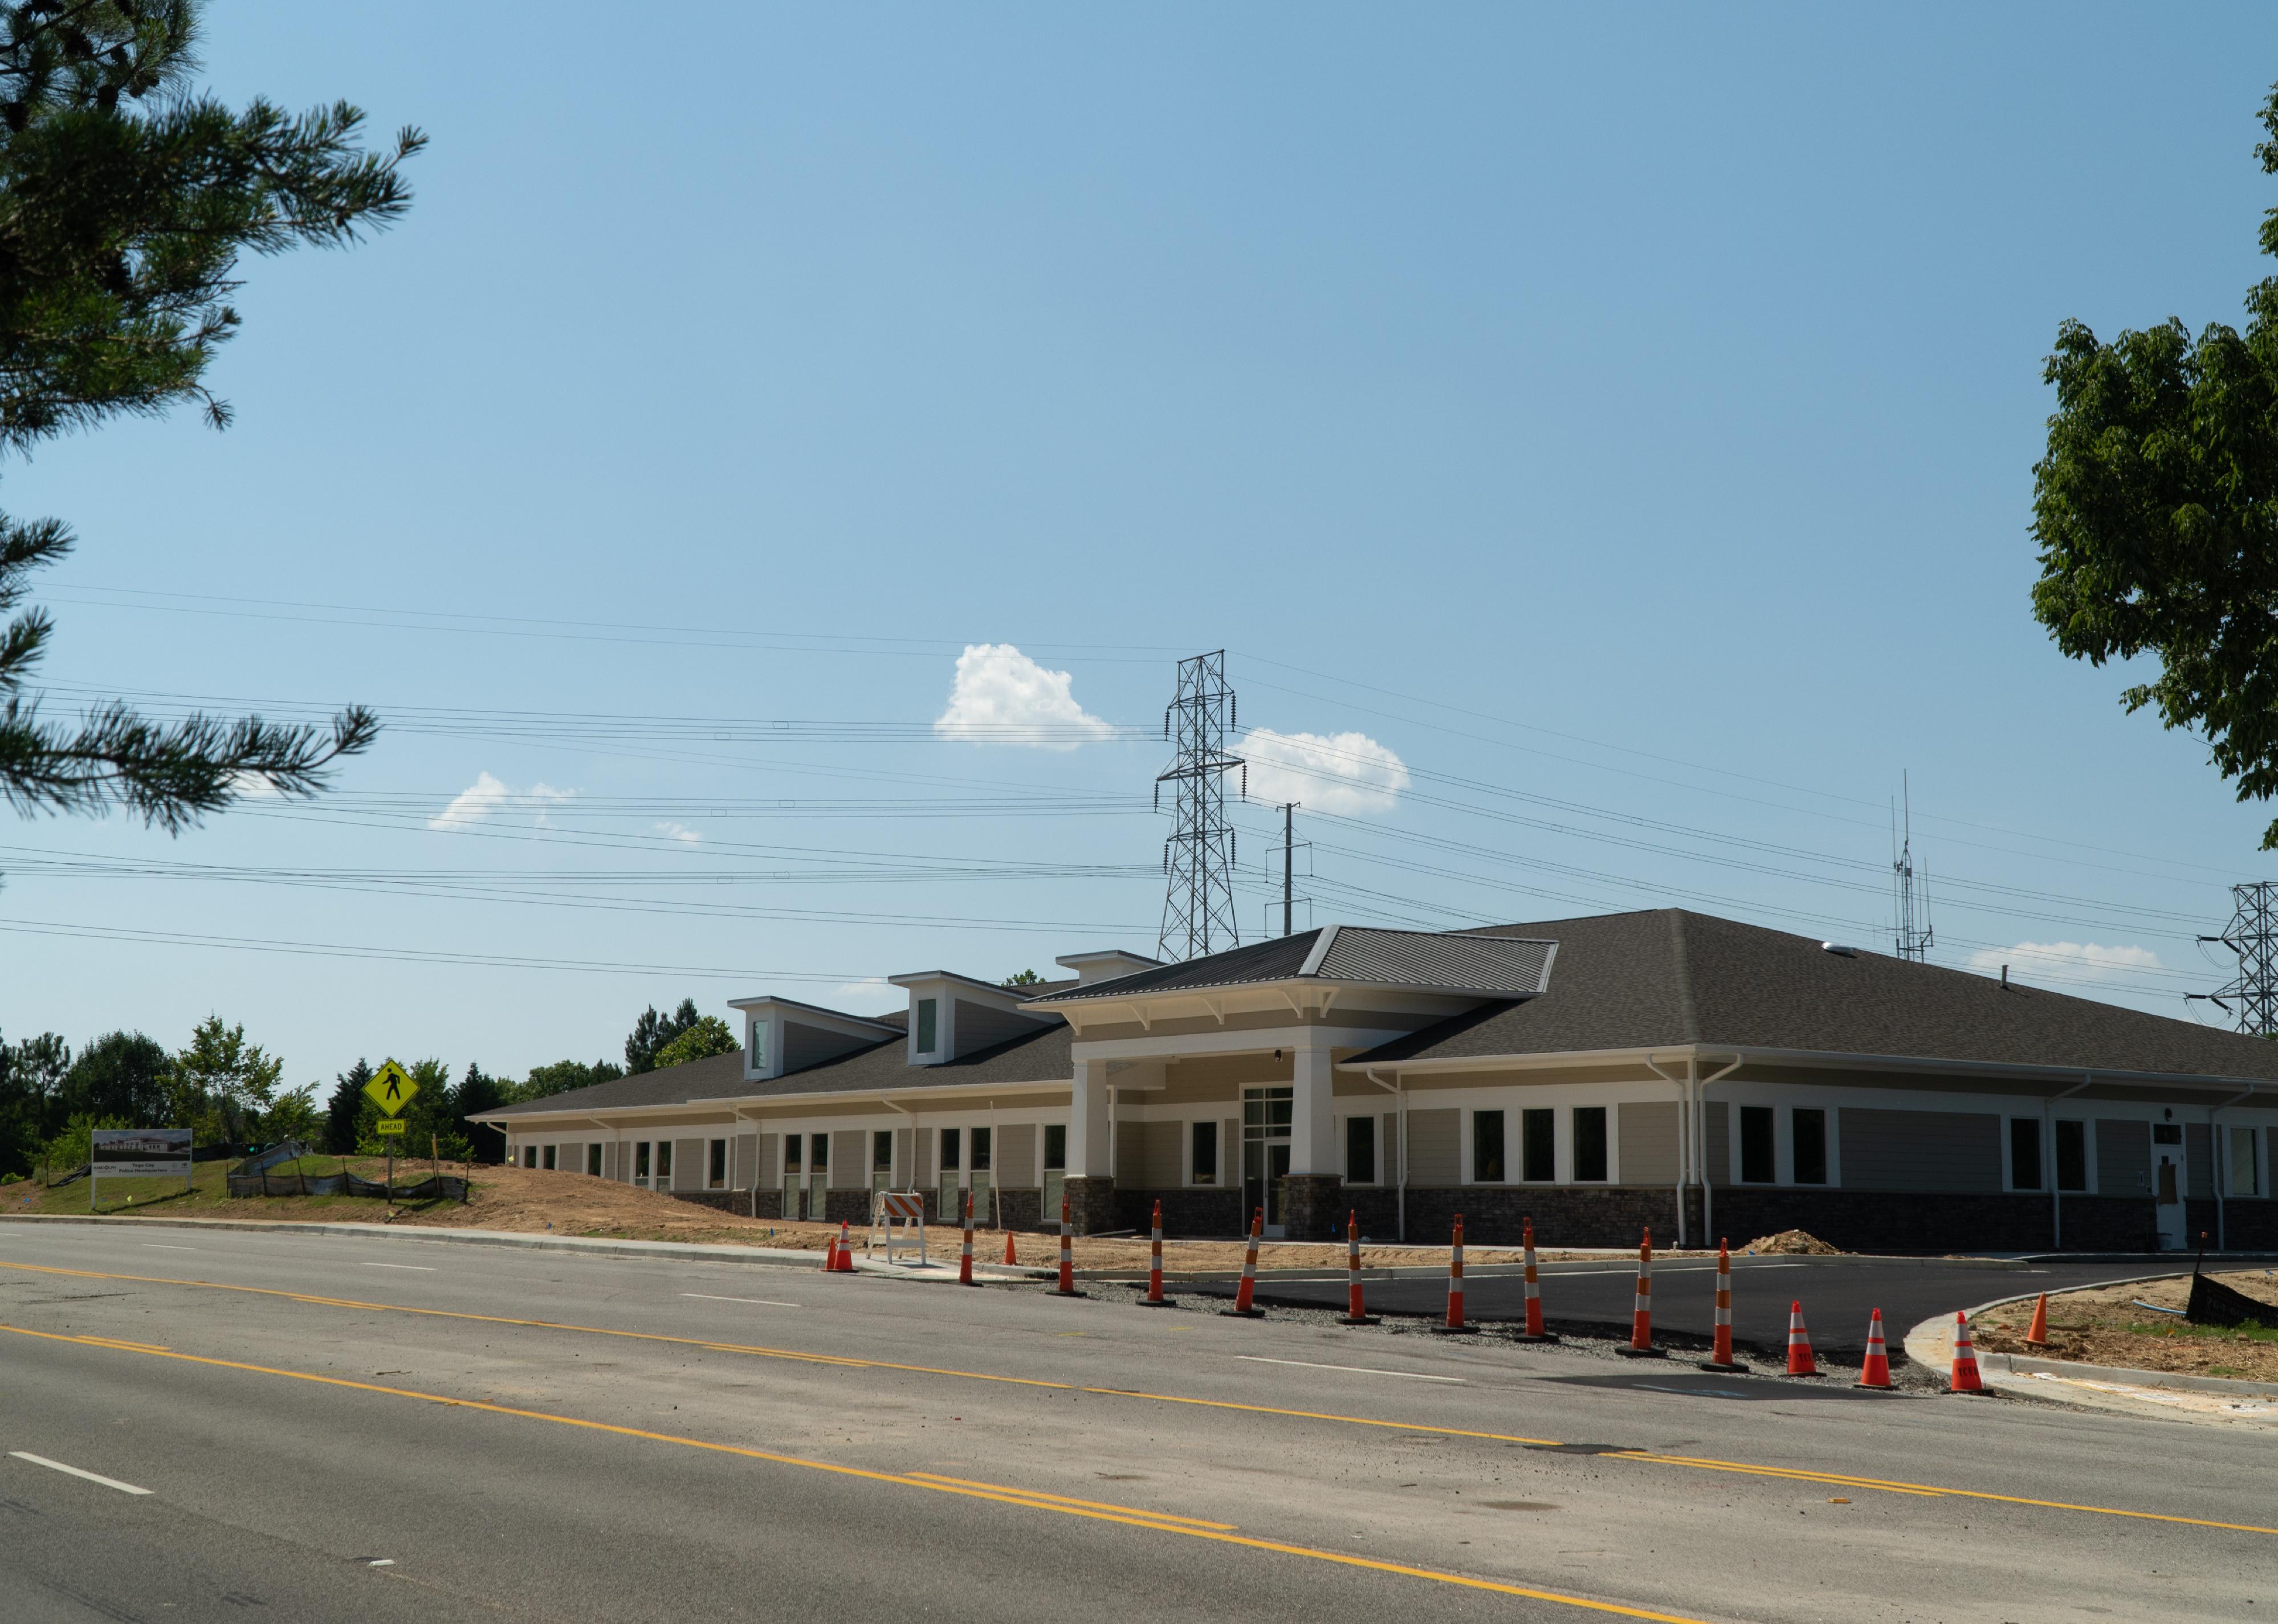 New police department under construction in Tega Cay, South Carolina.